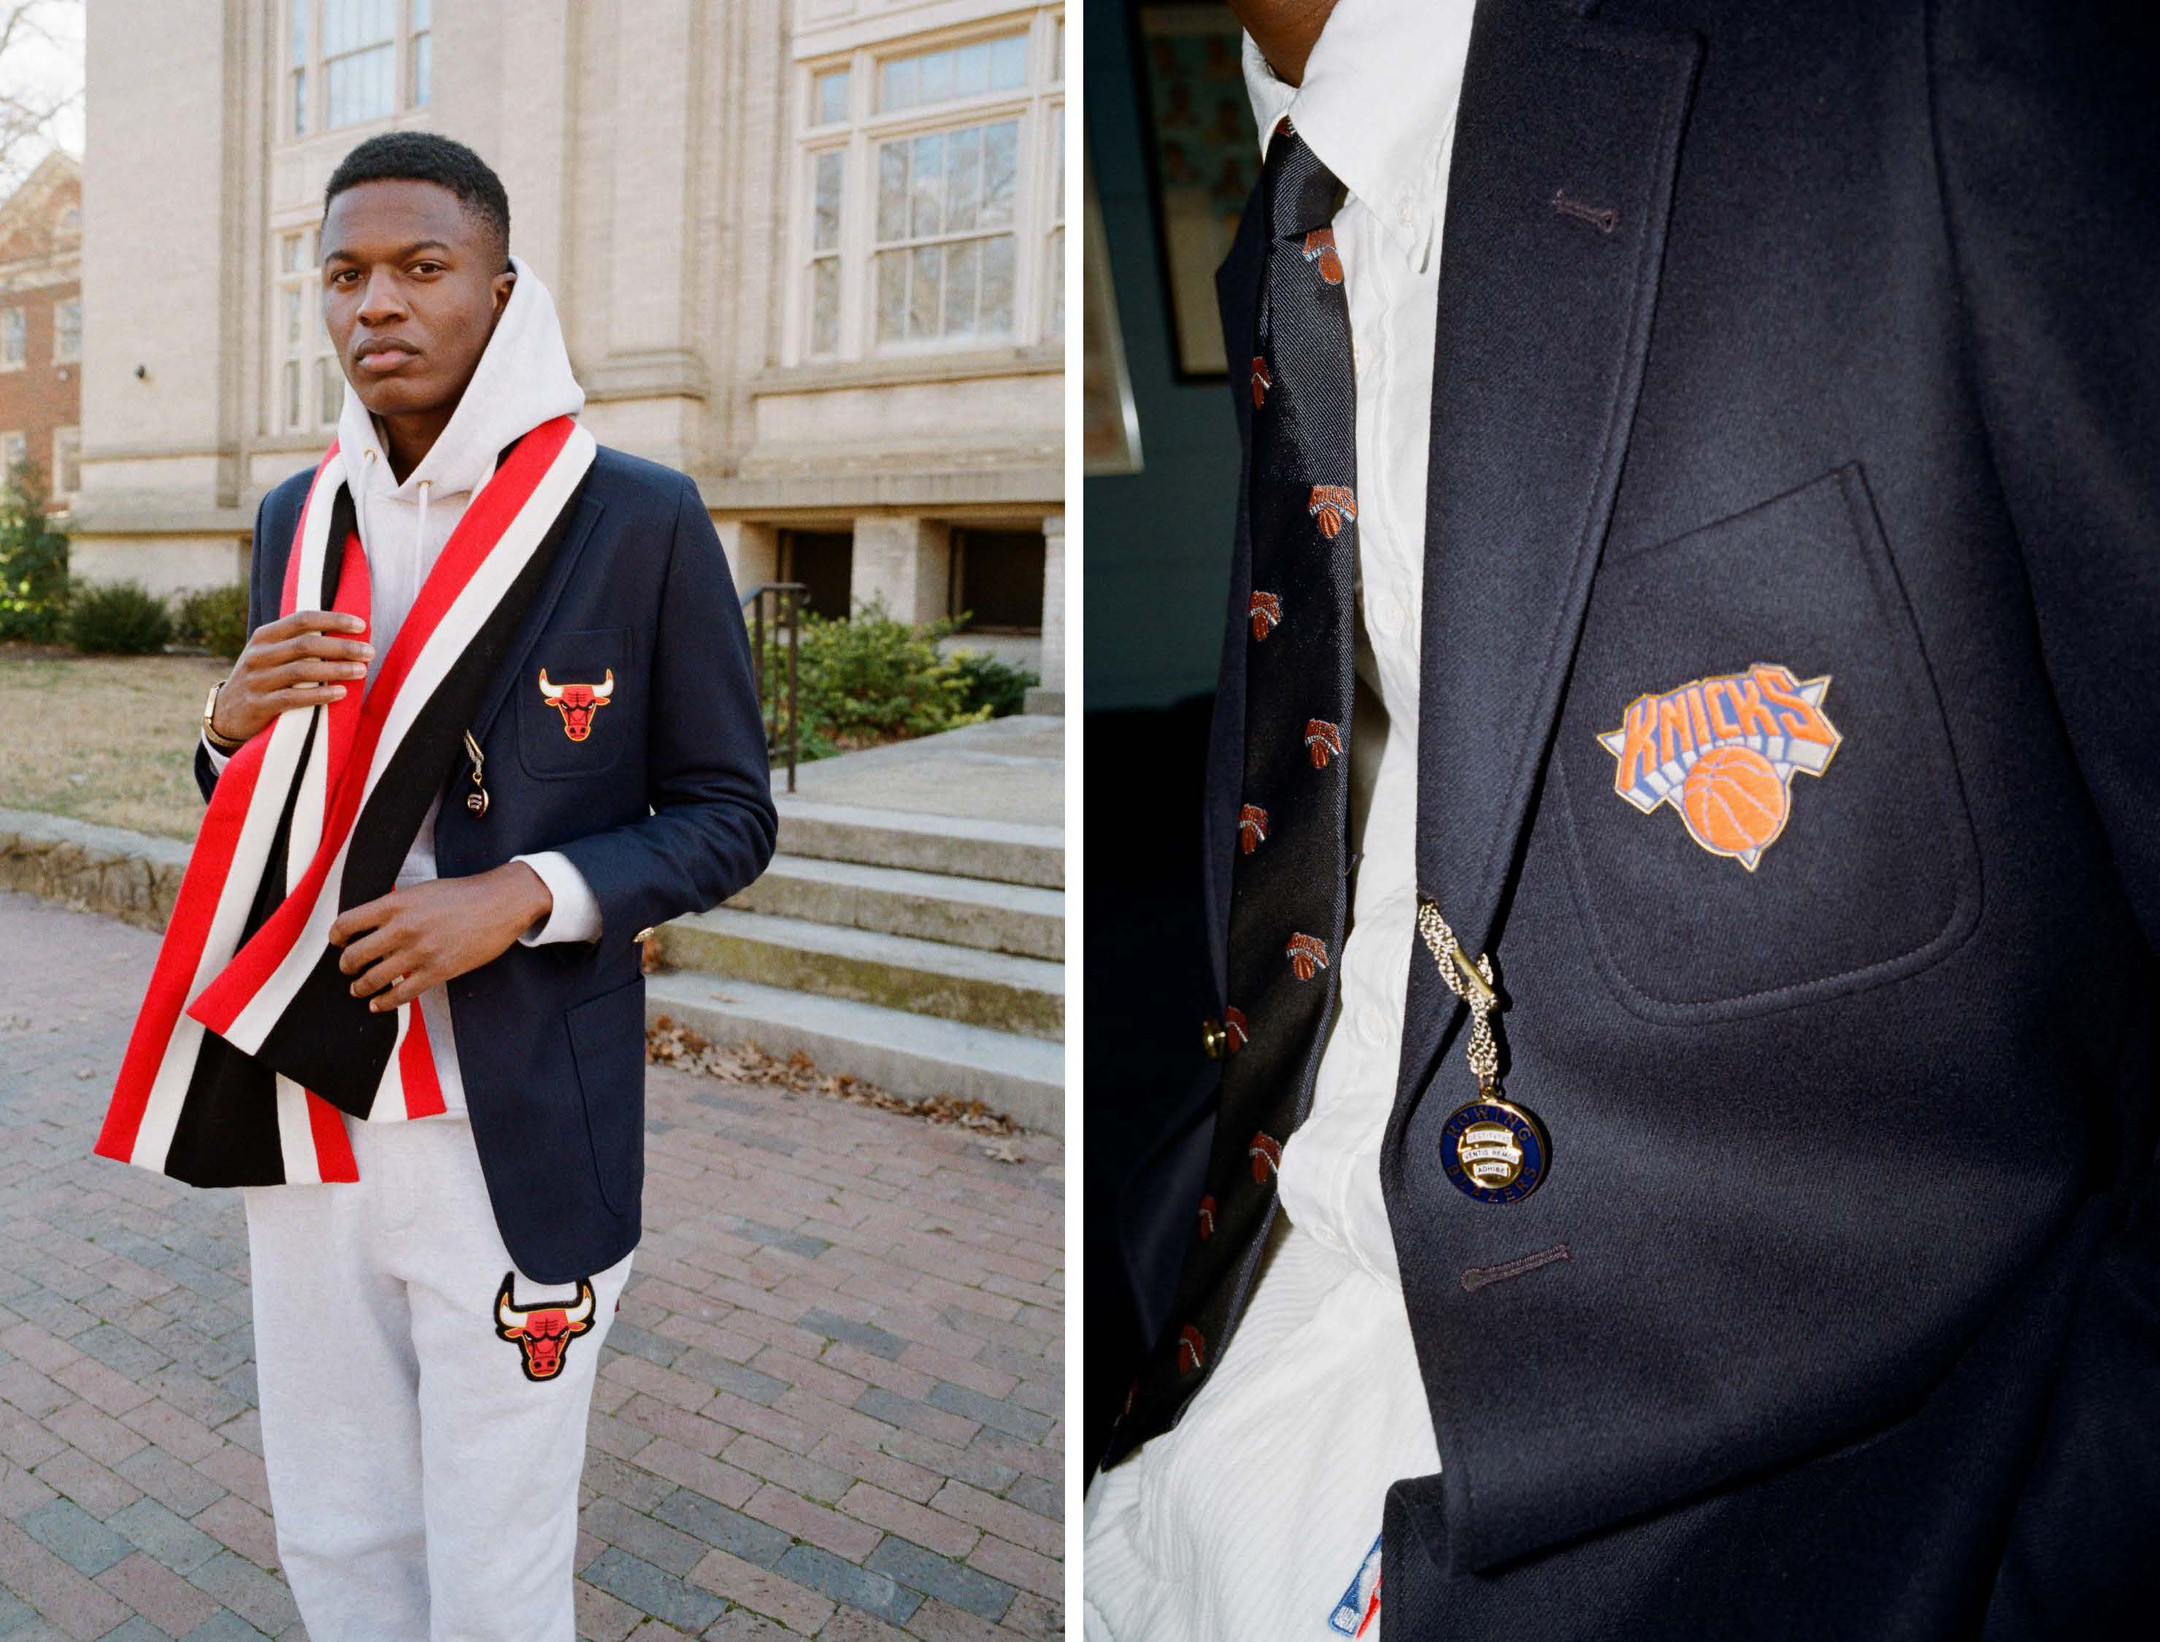 Model wearing the Chicago Bulls Scarf, Hoodie, and Blazer outside of The Graduate Chapel Hill. Same model wearing the New York Knicks Tie and Blazer.